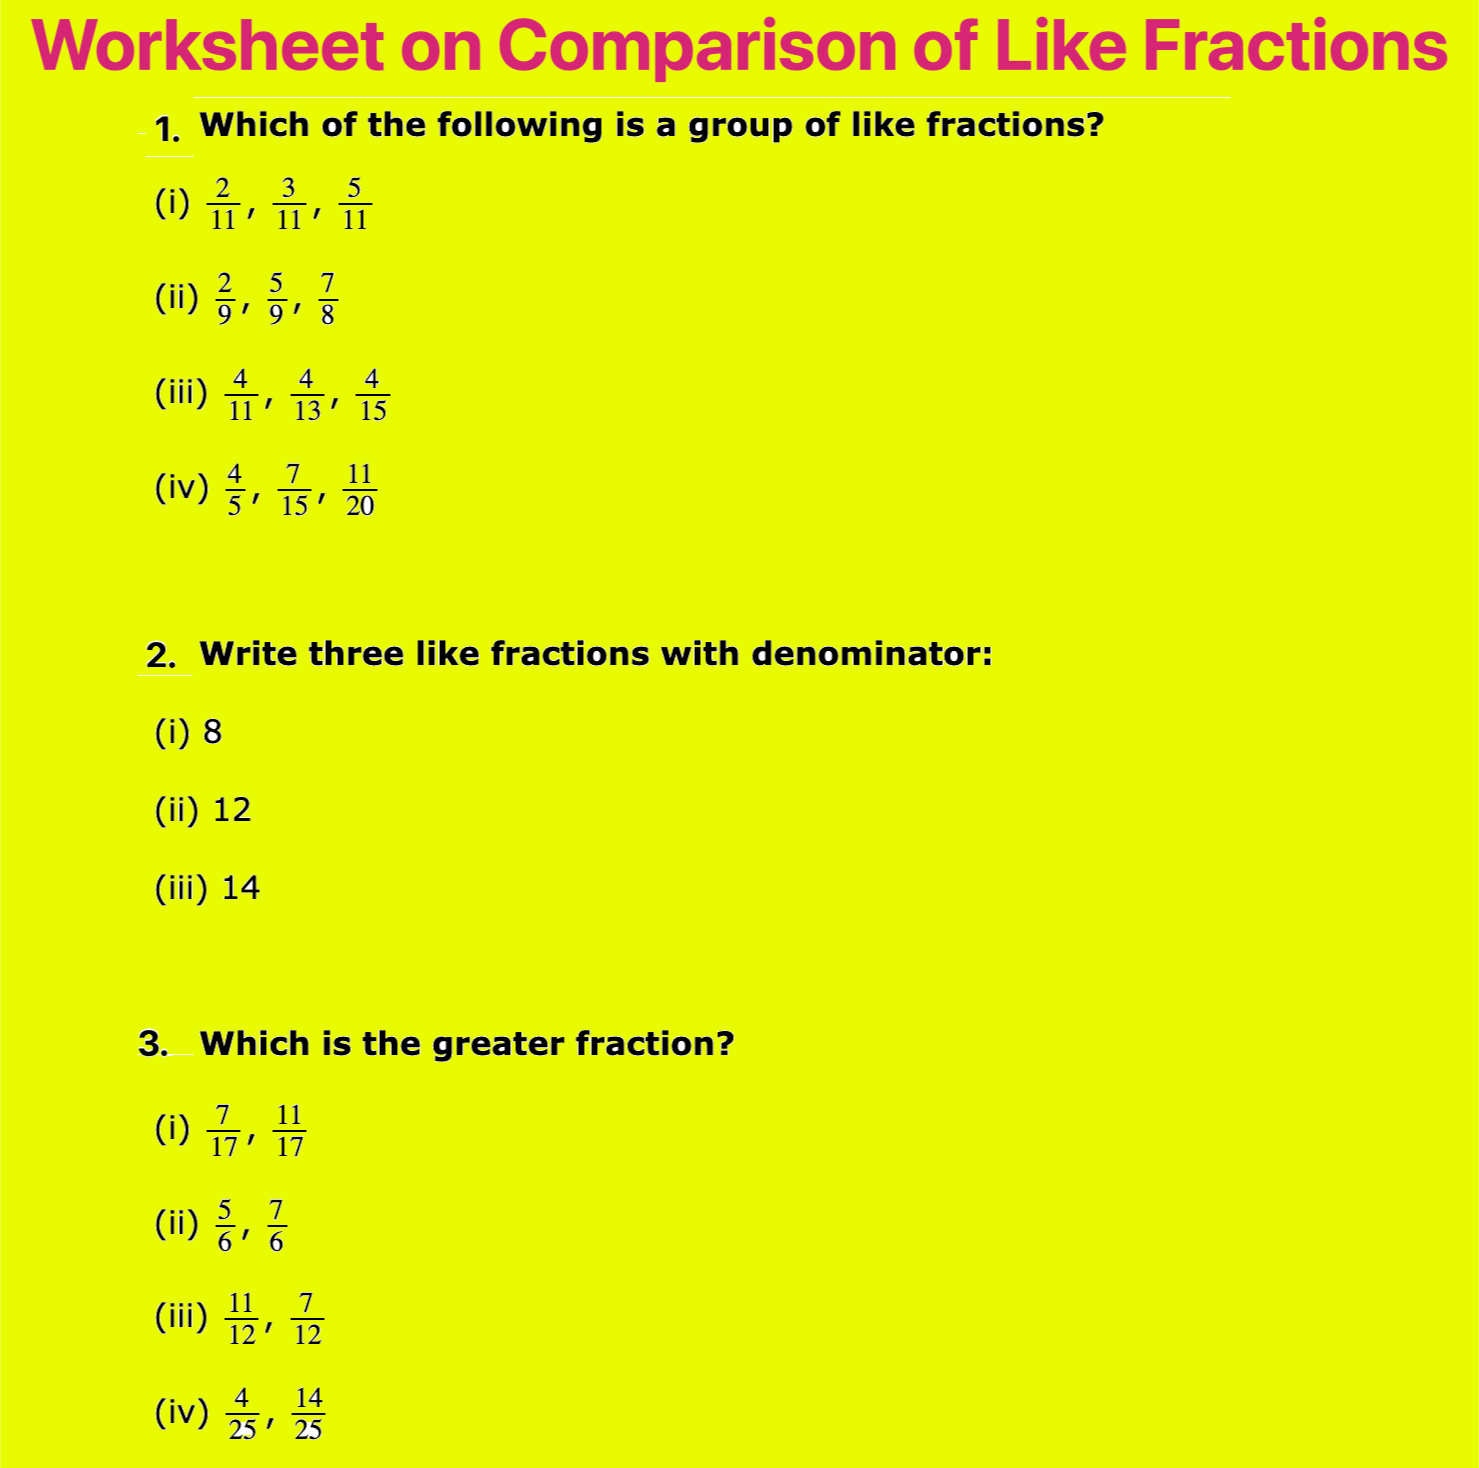 In worksheet on comparison of like fractions, all grade students can practice the questions on comparison of like fractions. This exercise sheet on comparison of like fractions can be practiced